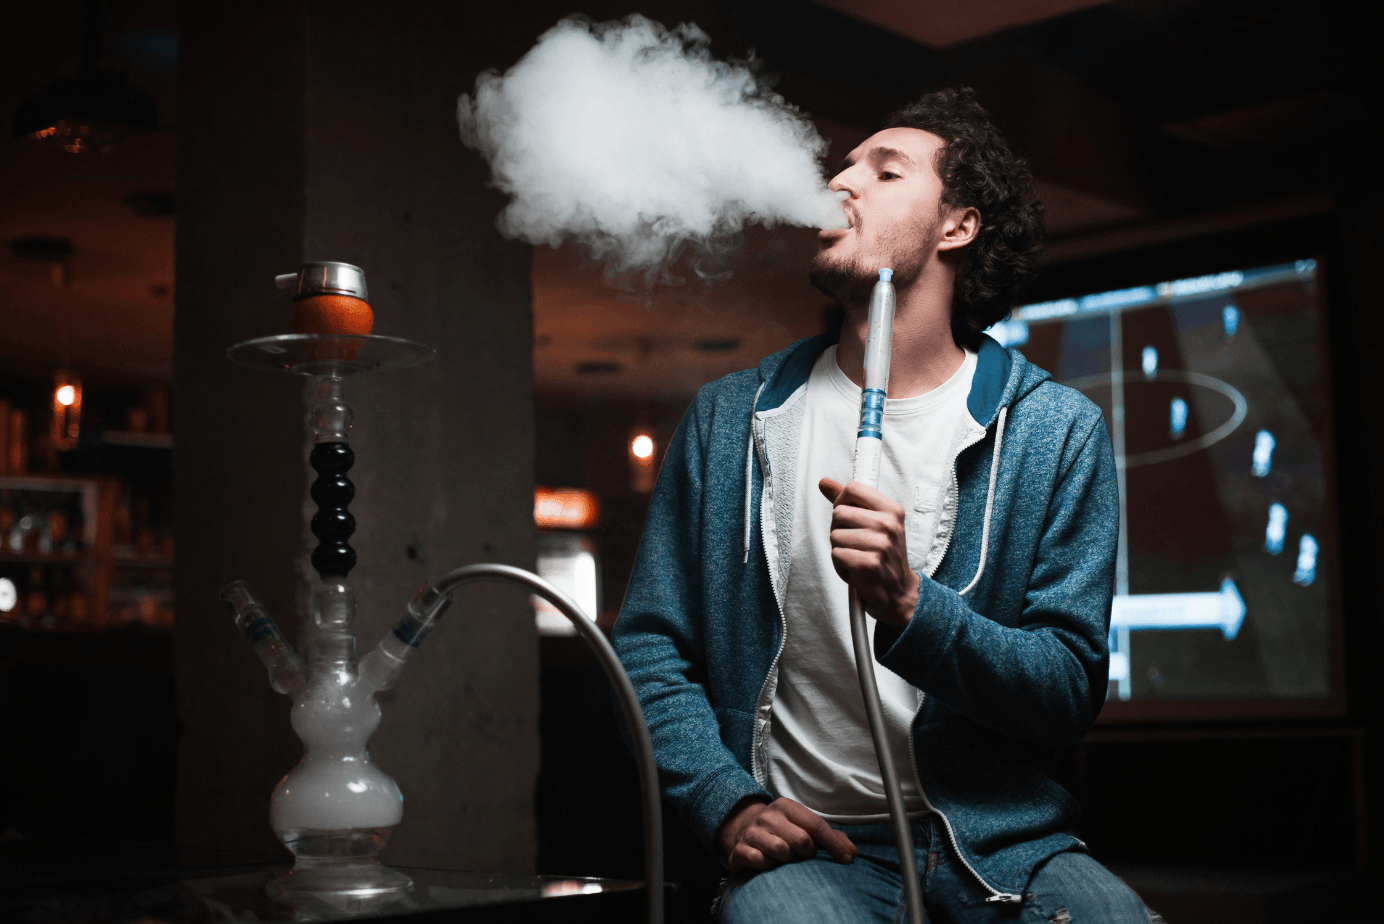 Hookahtobacco3 81365fabee5d16309038f2adade8868a 2000How To Choose the Right Hookah Tobacco?